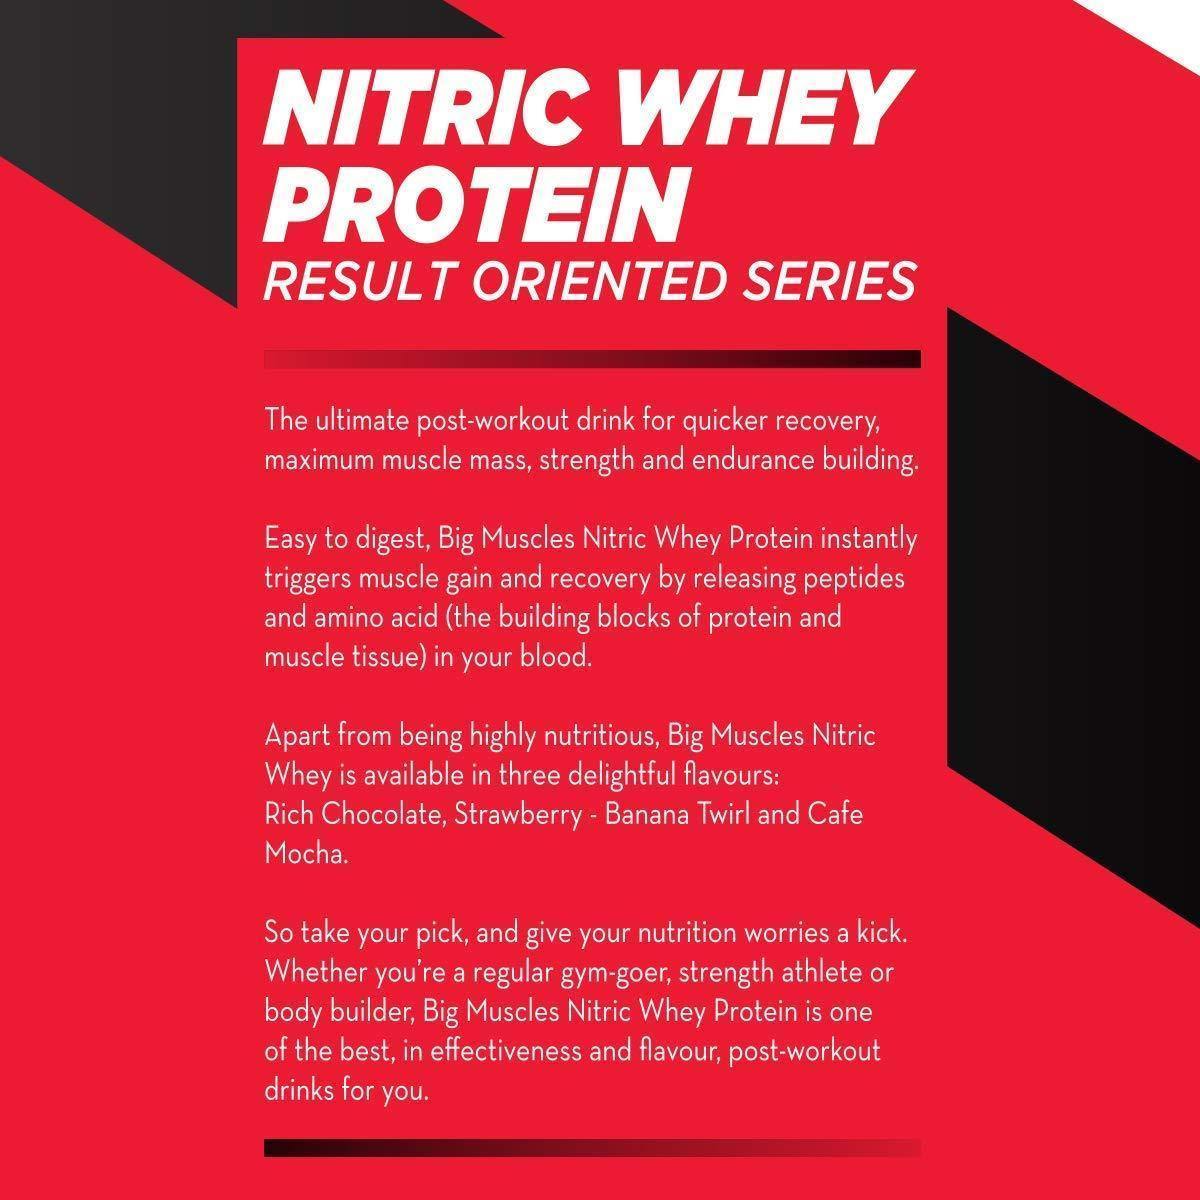 NutraEats Protein Plus Body Building Gym Supplement Whey Protein